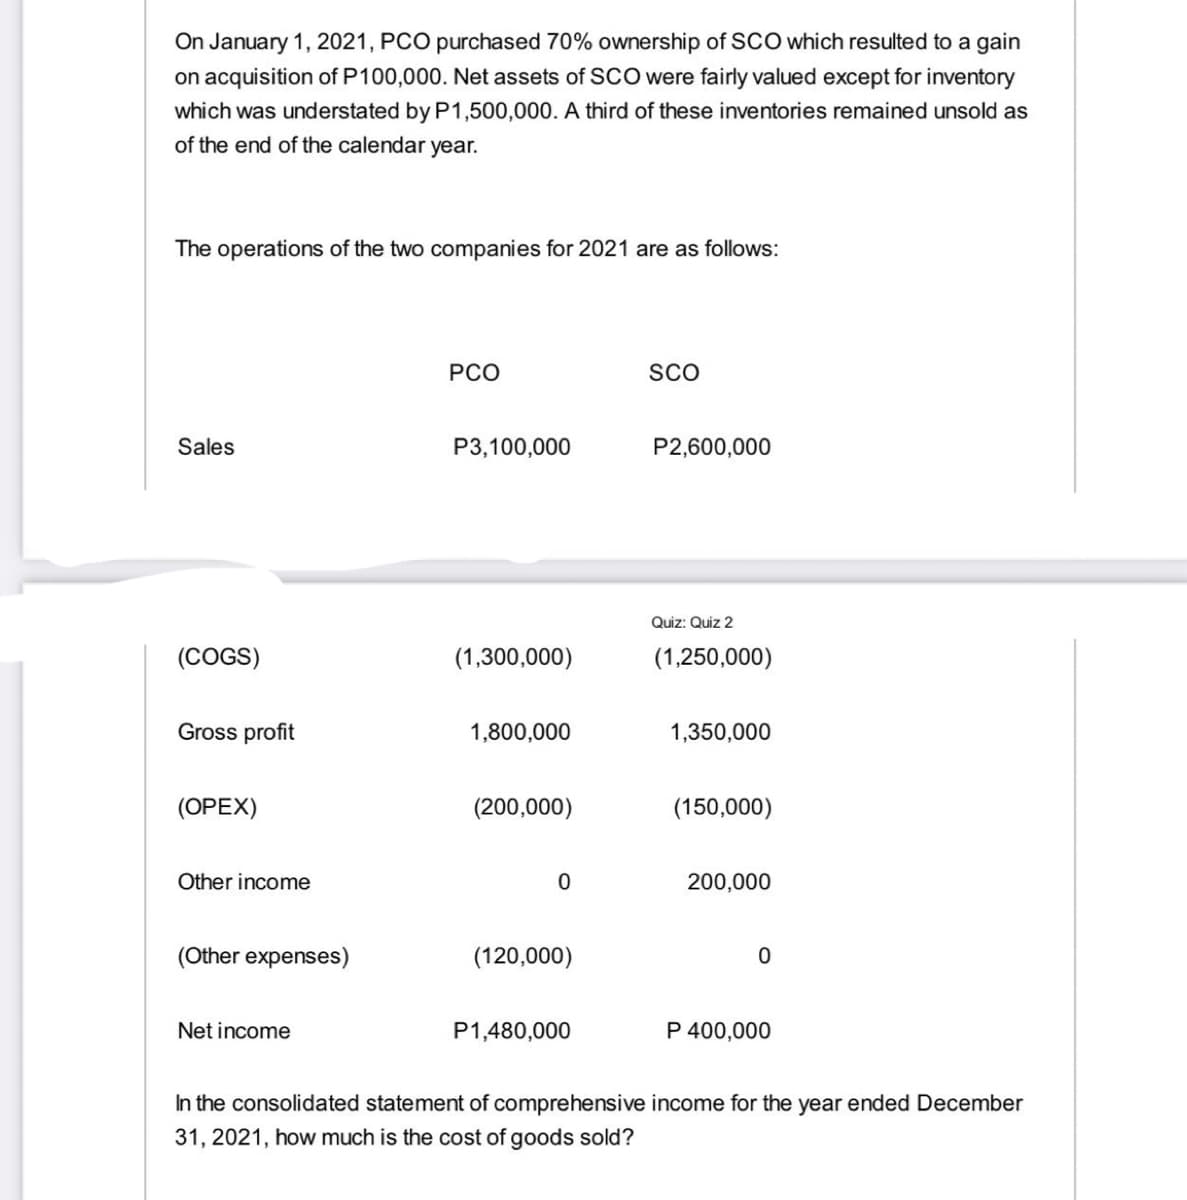 On January 1, 2021, PCO purchased 70% ownership of SCO which resulted to a gain
on acquisition of P100,000. Net assets of SCO were fairly valued except for inventory
which was understated by P1,500,000. A third of these inventories remained unsold as
of the end of the calendar year.
The operations of the two companies for 2021 are as follows:
PCO
SCO
Sales
P3,100,000
P2,600,000
Quiz: Quiz 2
(COGS)
(1,300,000)
(1,250,000)
Gross profit
1,800,000
1,350,000
(OPEX)
(200,000)
(150,000)
Other income
200,000
(Other expenses)
(120,000)
Net income
P1,480,000
P 400,000
In the consolidated statement of comprehensive income for the year ended December
31, 2021, how much is the cost of goods sold?
